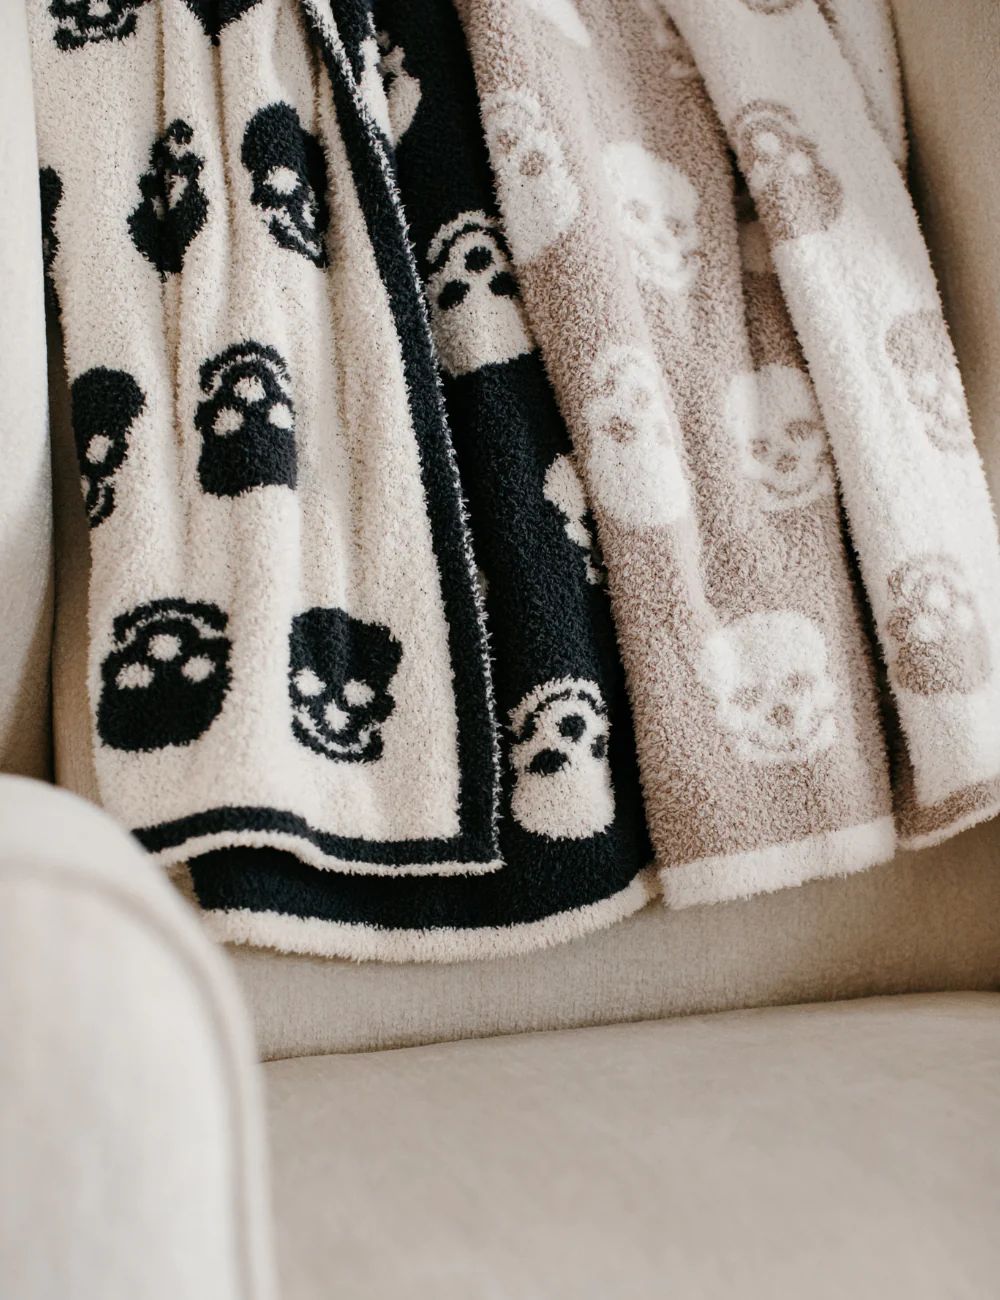 TSC X Tia Booth : Skulls Buttery Blanket | The Styled Collection